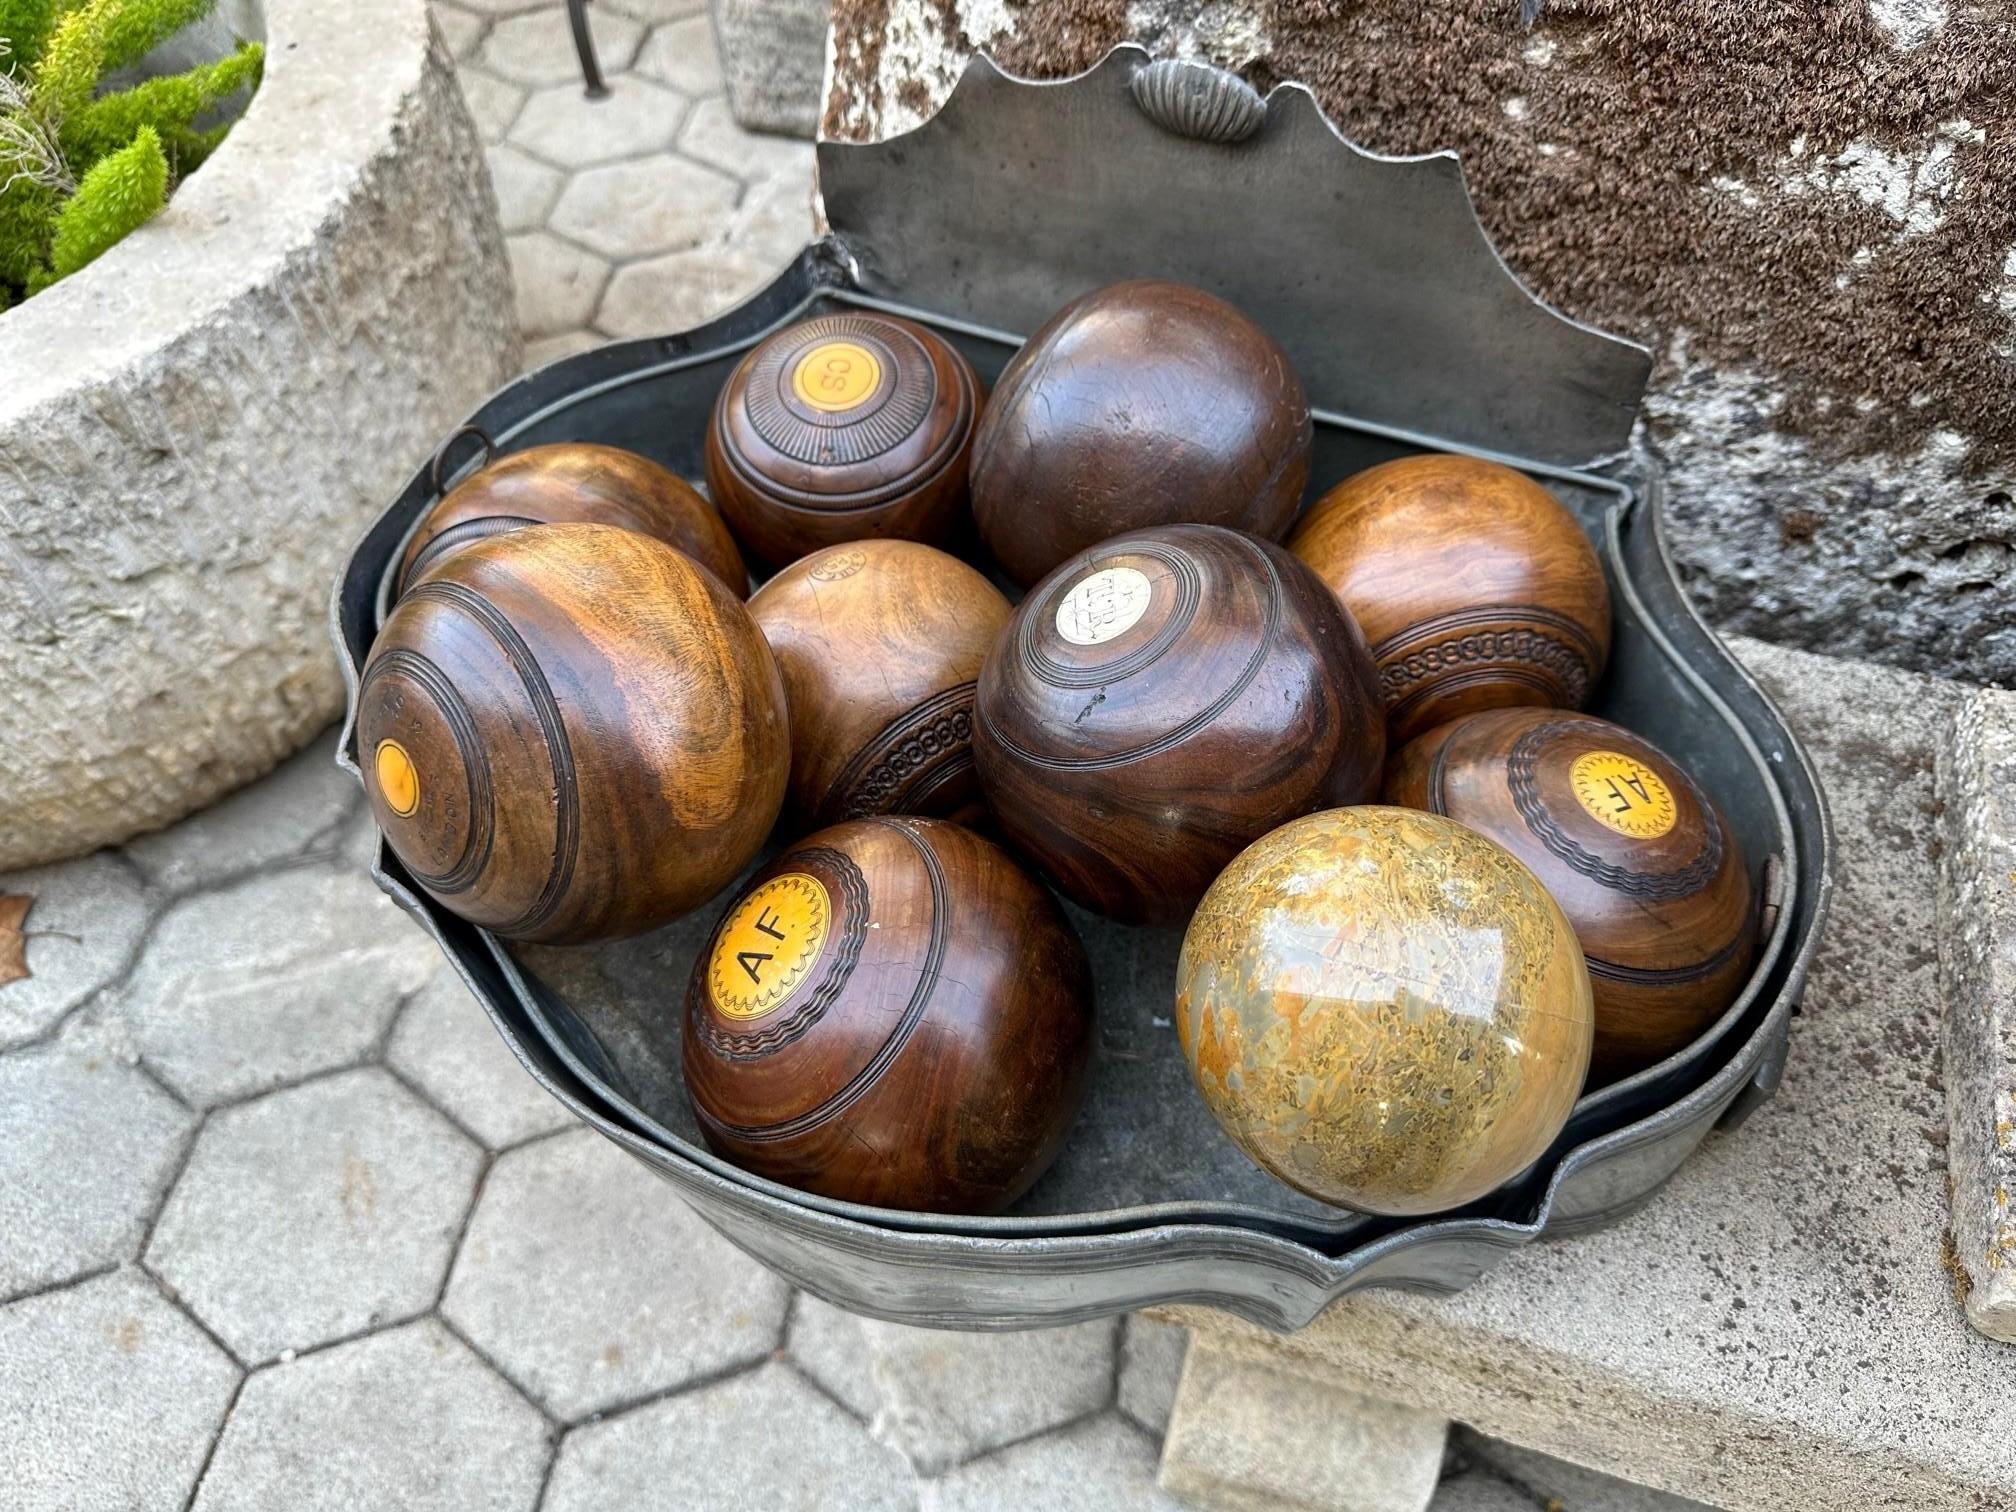 10 Carpet Lawn Bowling Hand Carved Wood & Stone Balls Antique Office Gift Idea For Sale 3